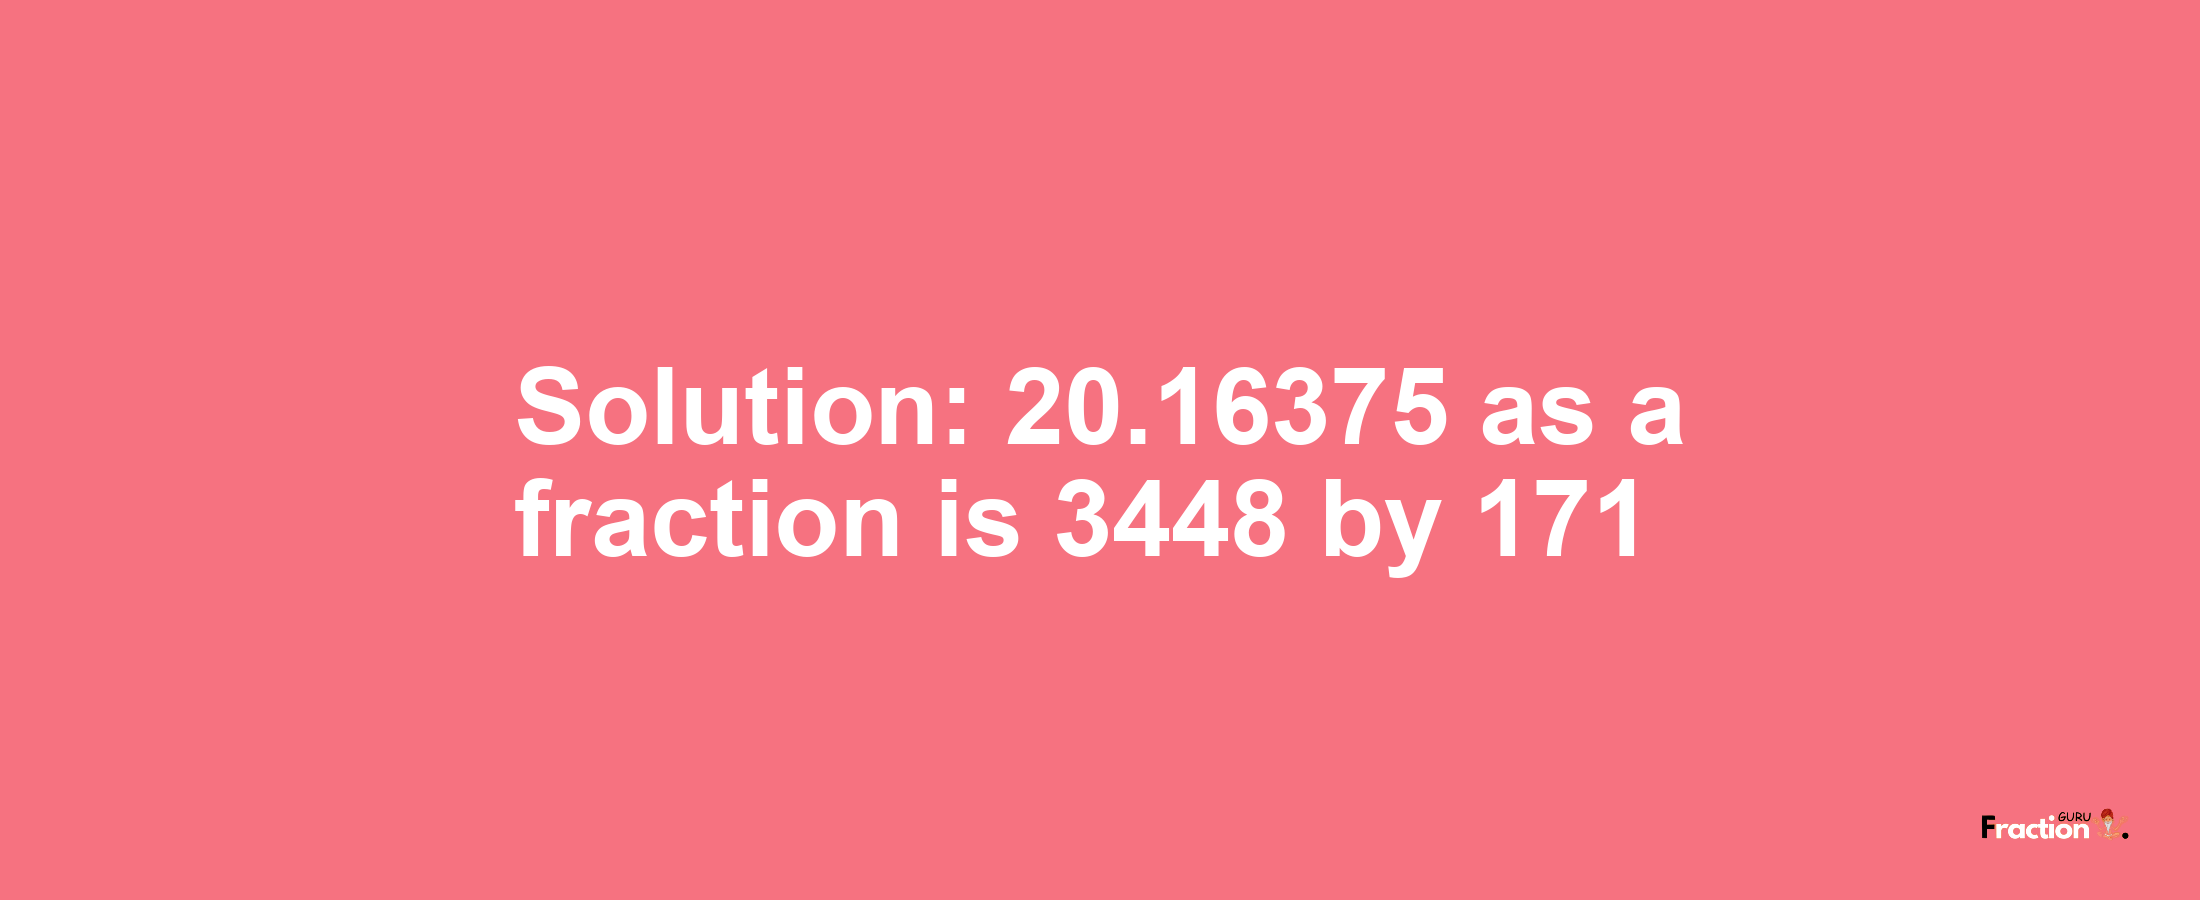 Solution:20.16375 as a fraction is 3448/171